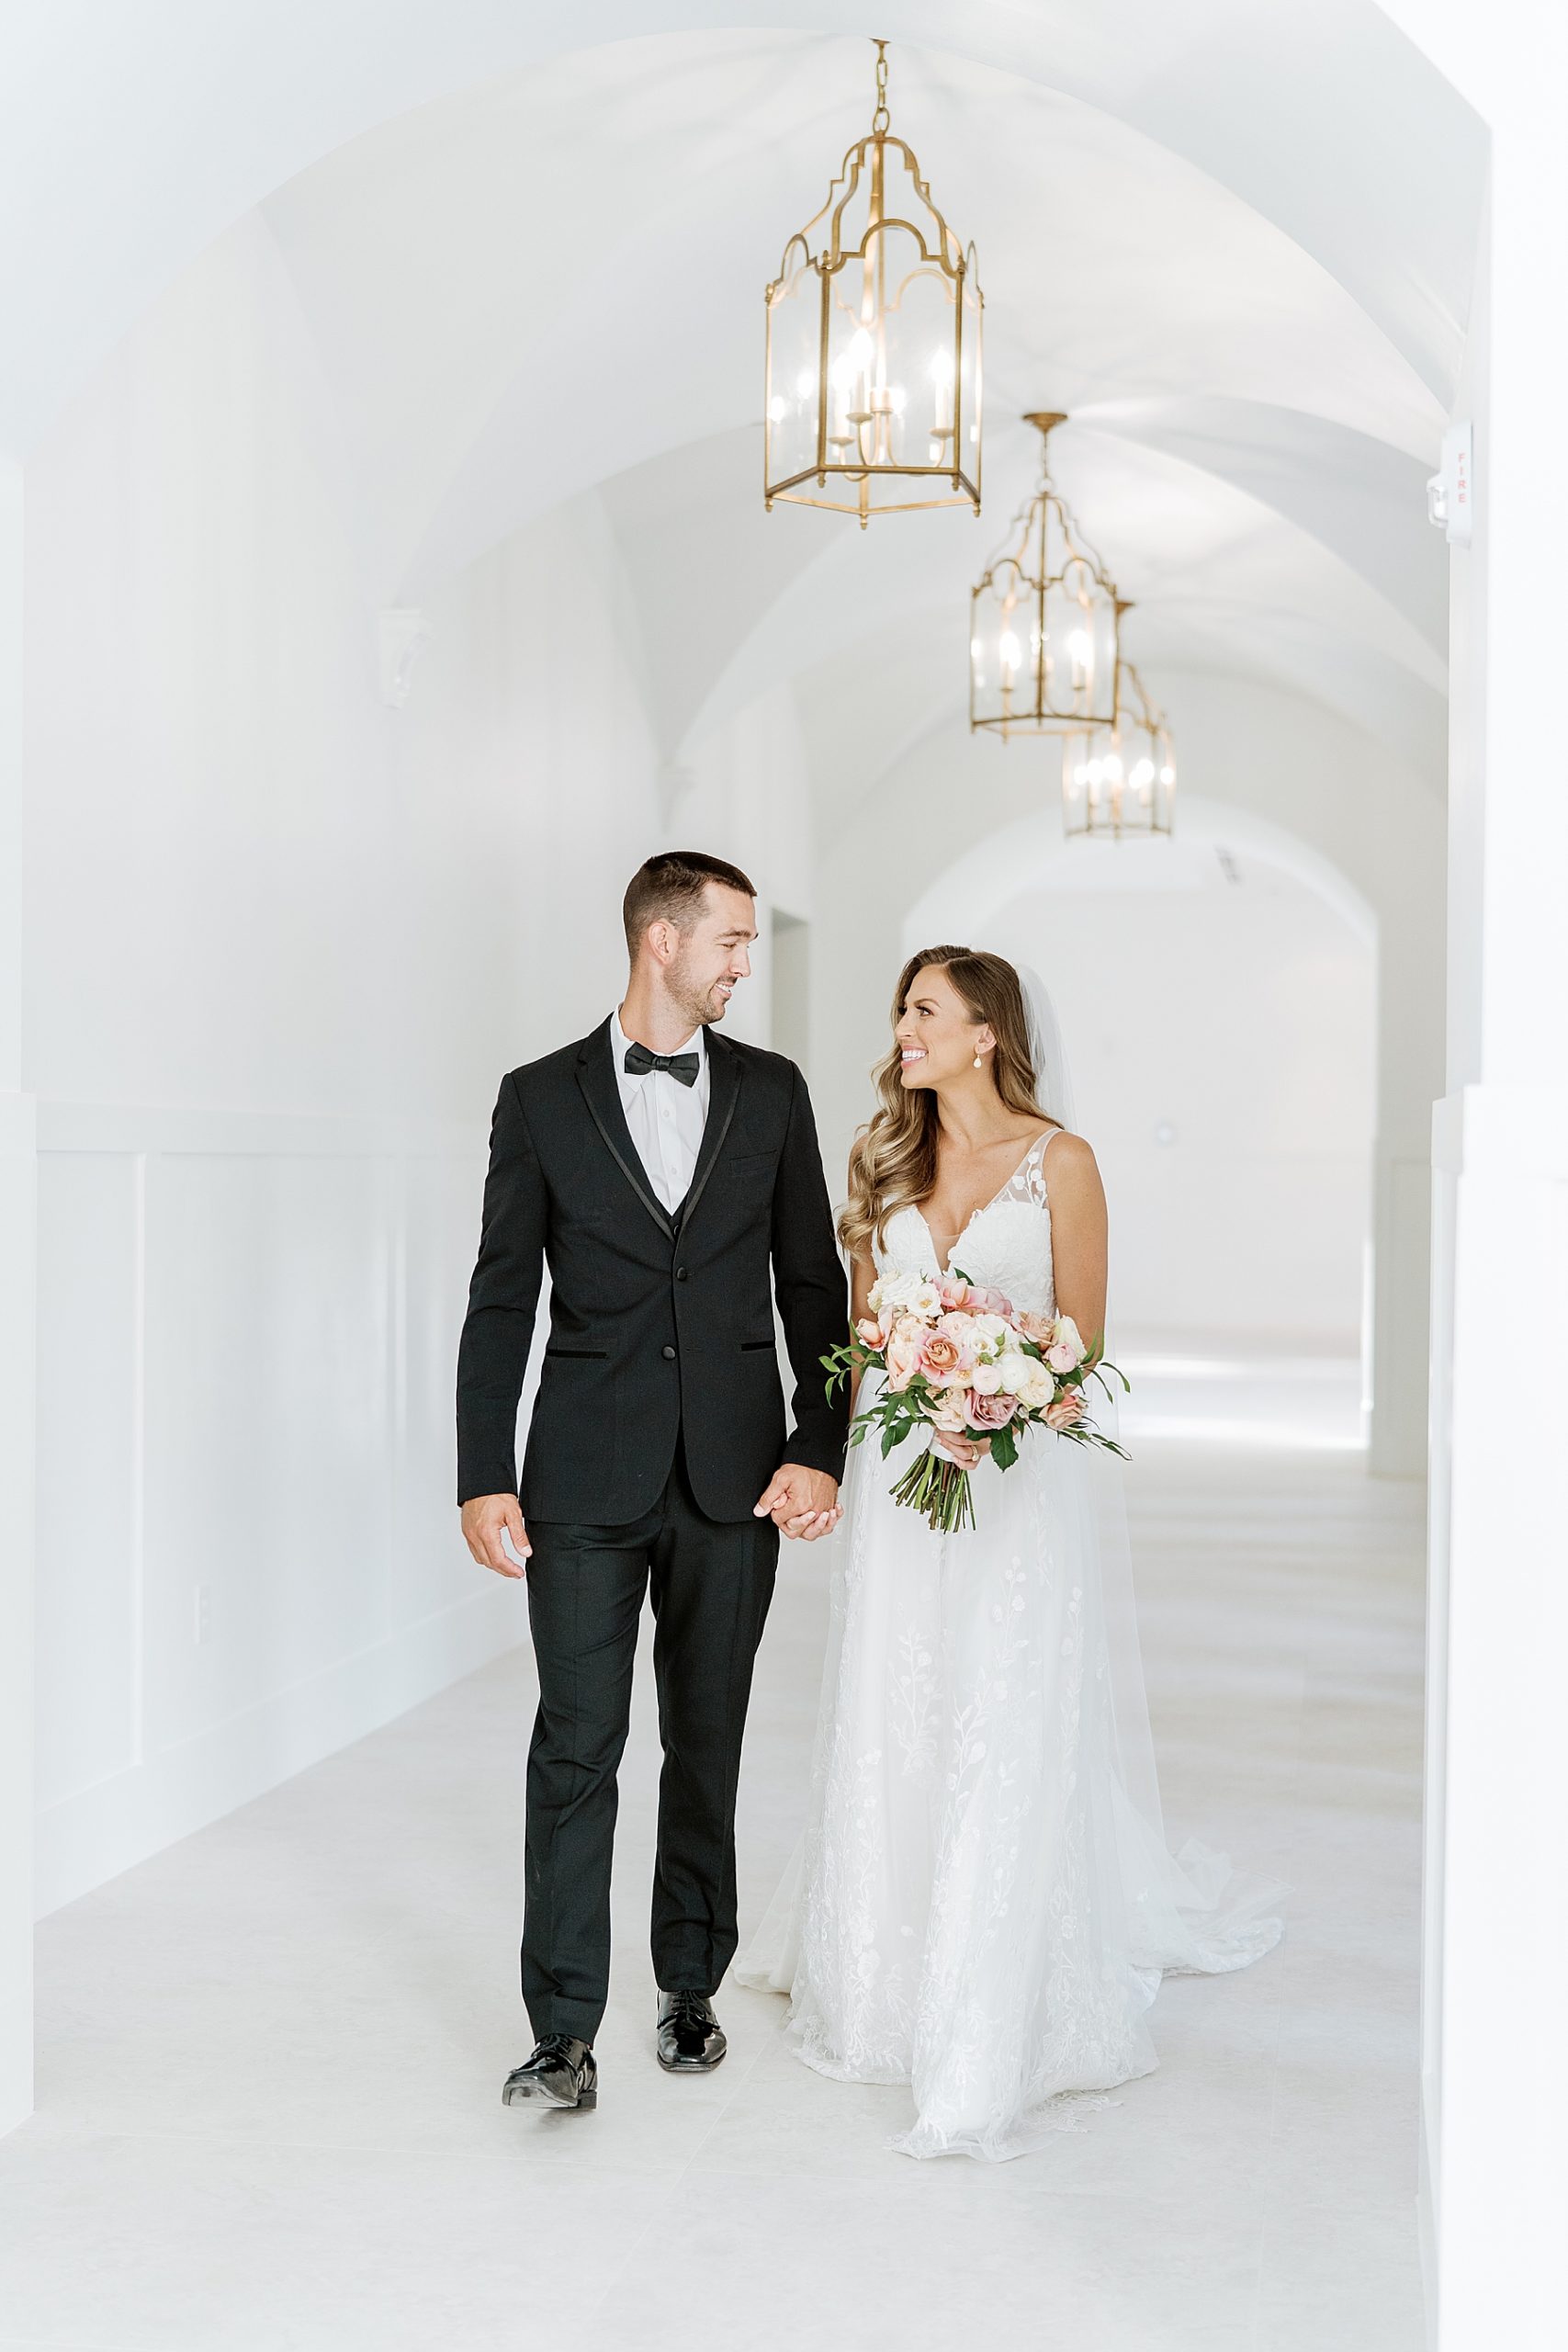 Couple walk together down hallway after ceremony | Reiley and Rose | Central Texas Wedding Floral Designer | The Preserve at Canyon Lake Wedding Venue | classic wedding inspiration, chic wedding, pink wedding color scheme | via reileyandrose.com